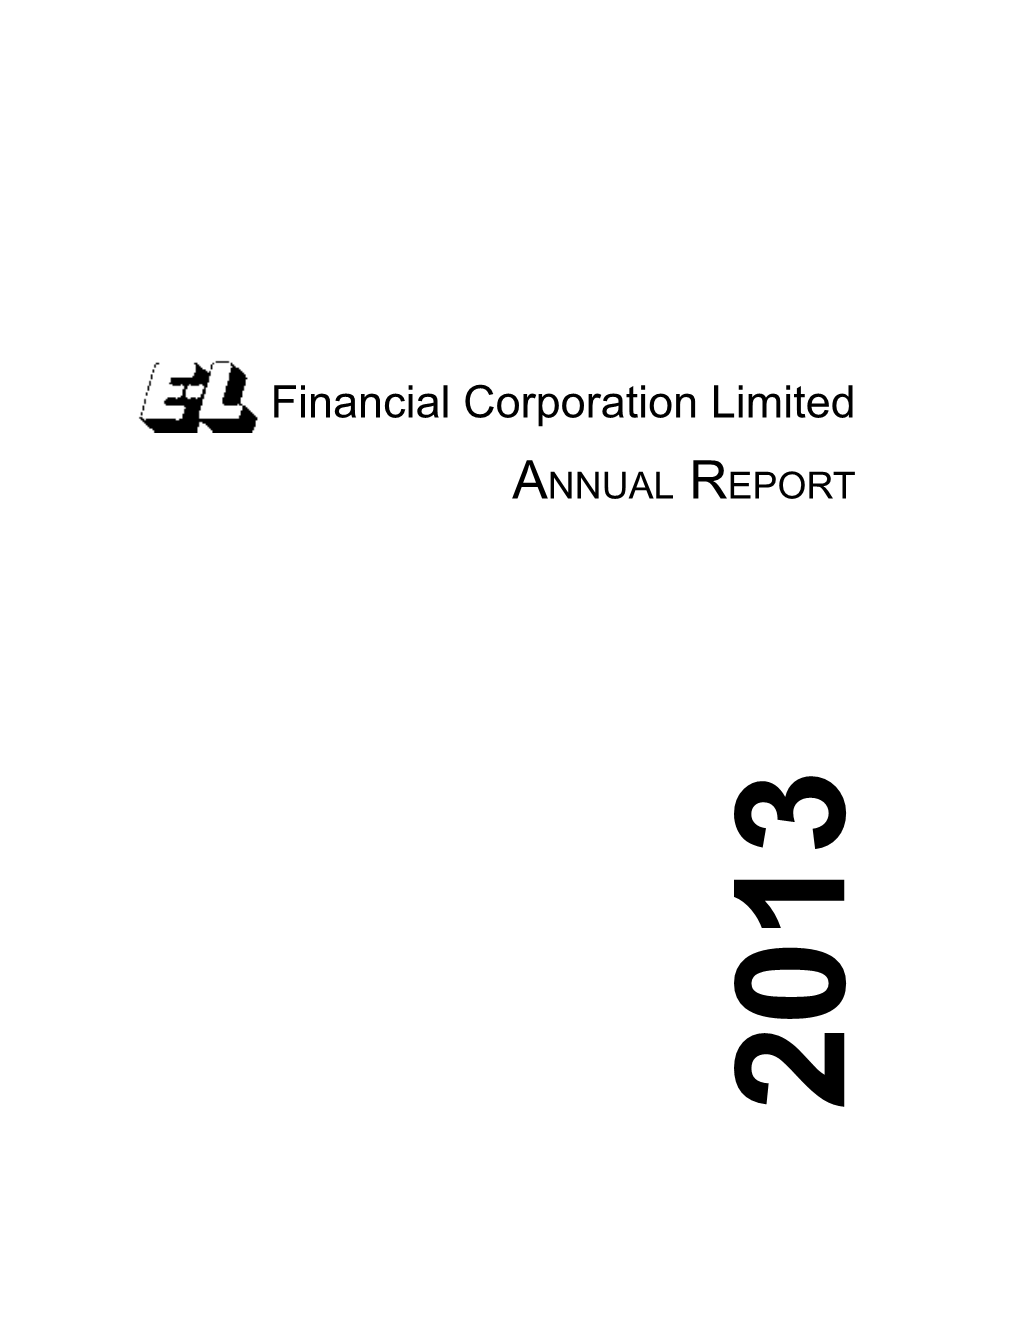 Financial Corporation Limited Annual Report 2013